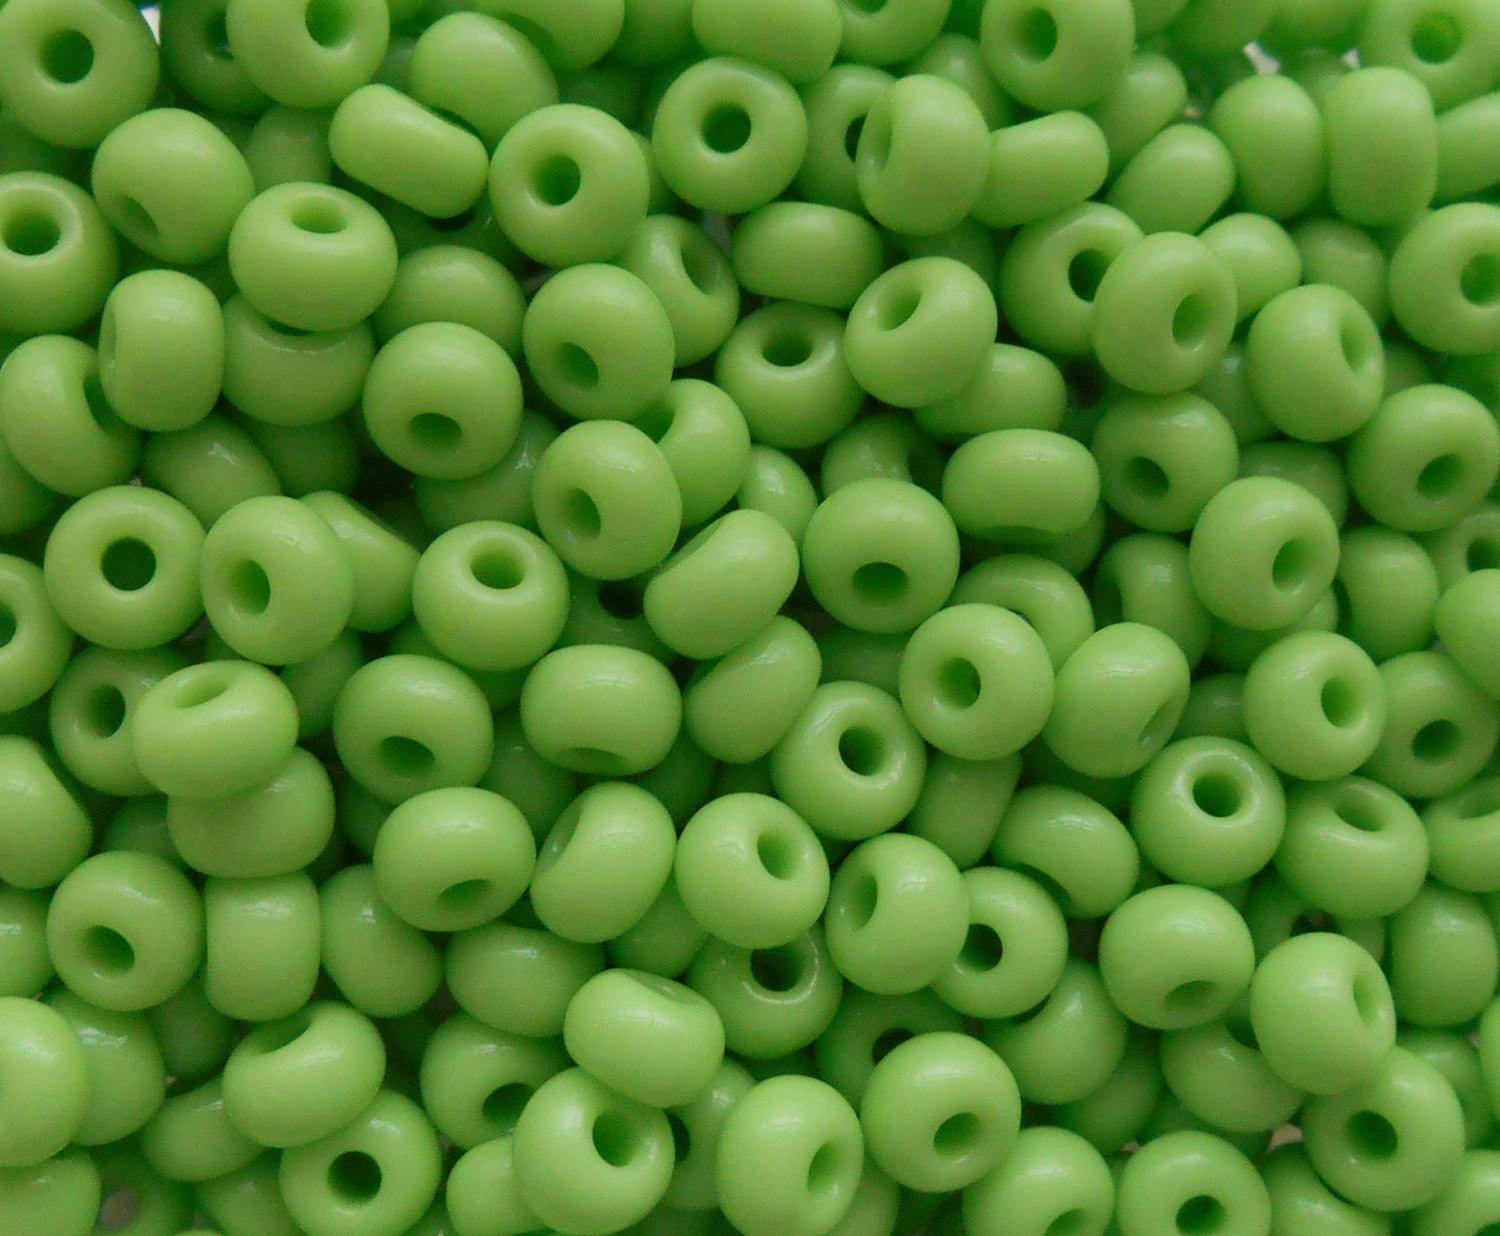 4mm Hole Beads for sale